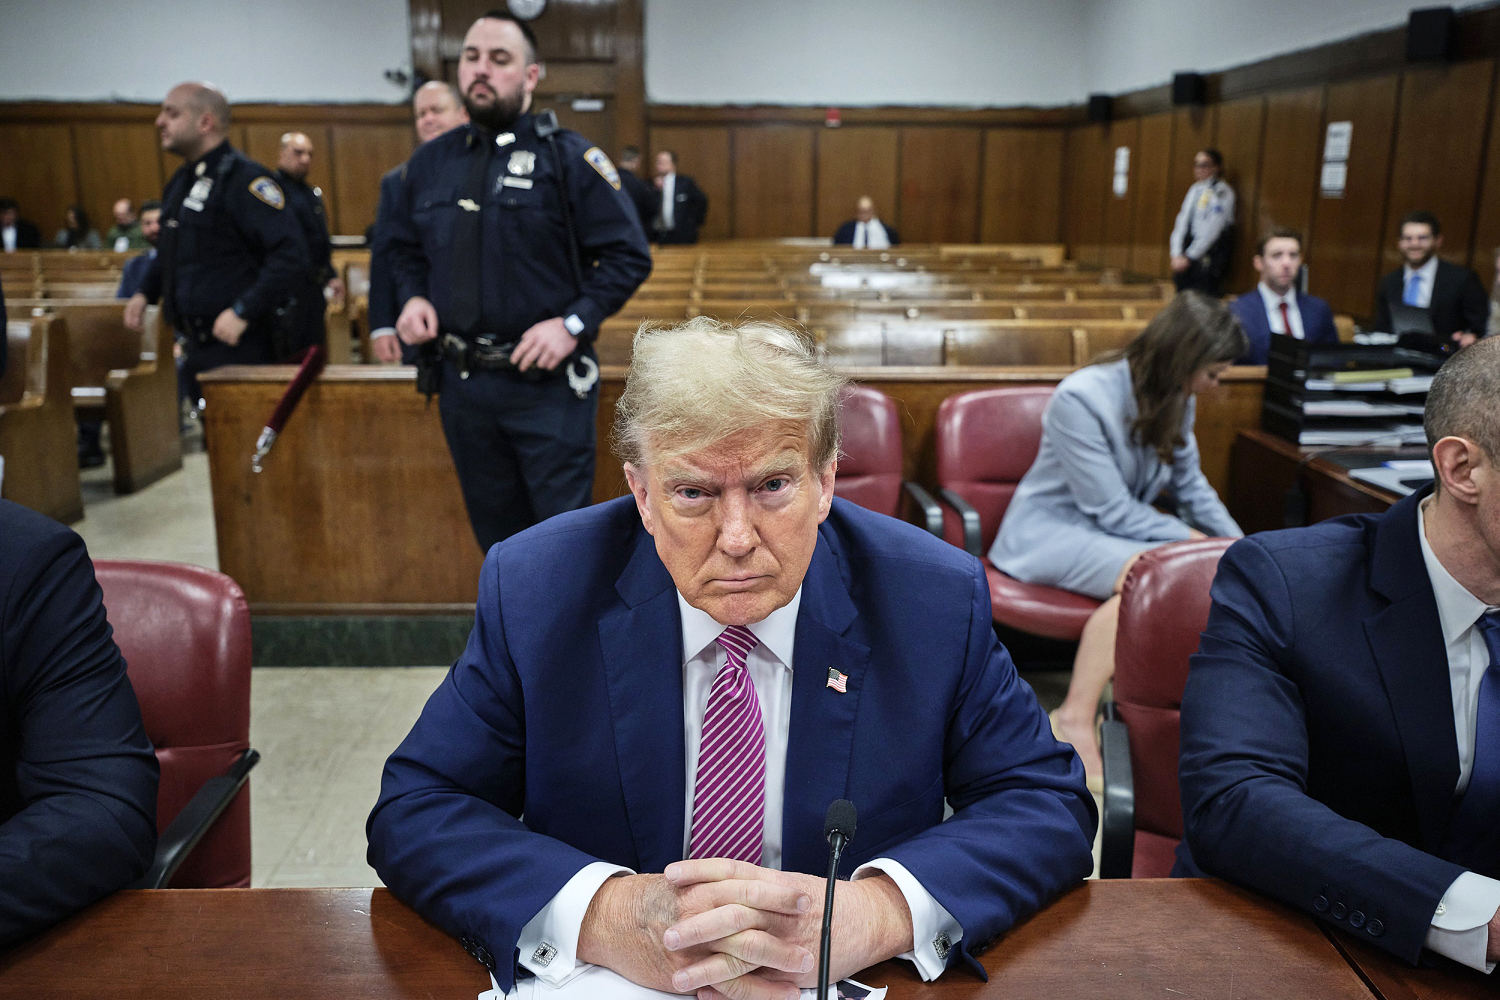 From stare-downs to shut-eye: Trump's every move in criminal trial under the microscope